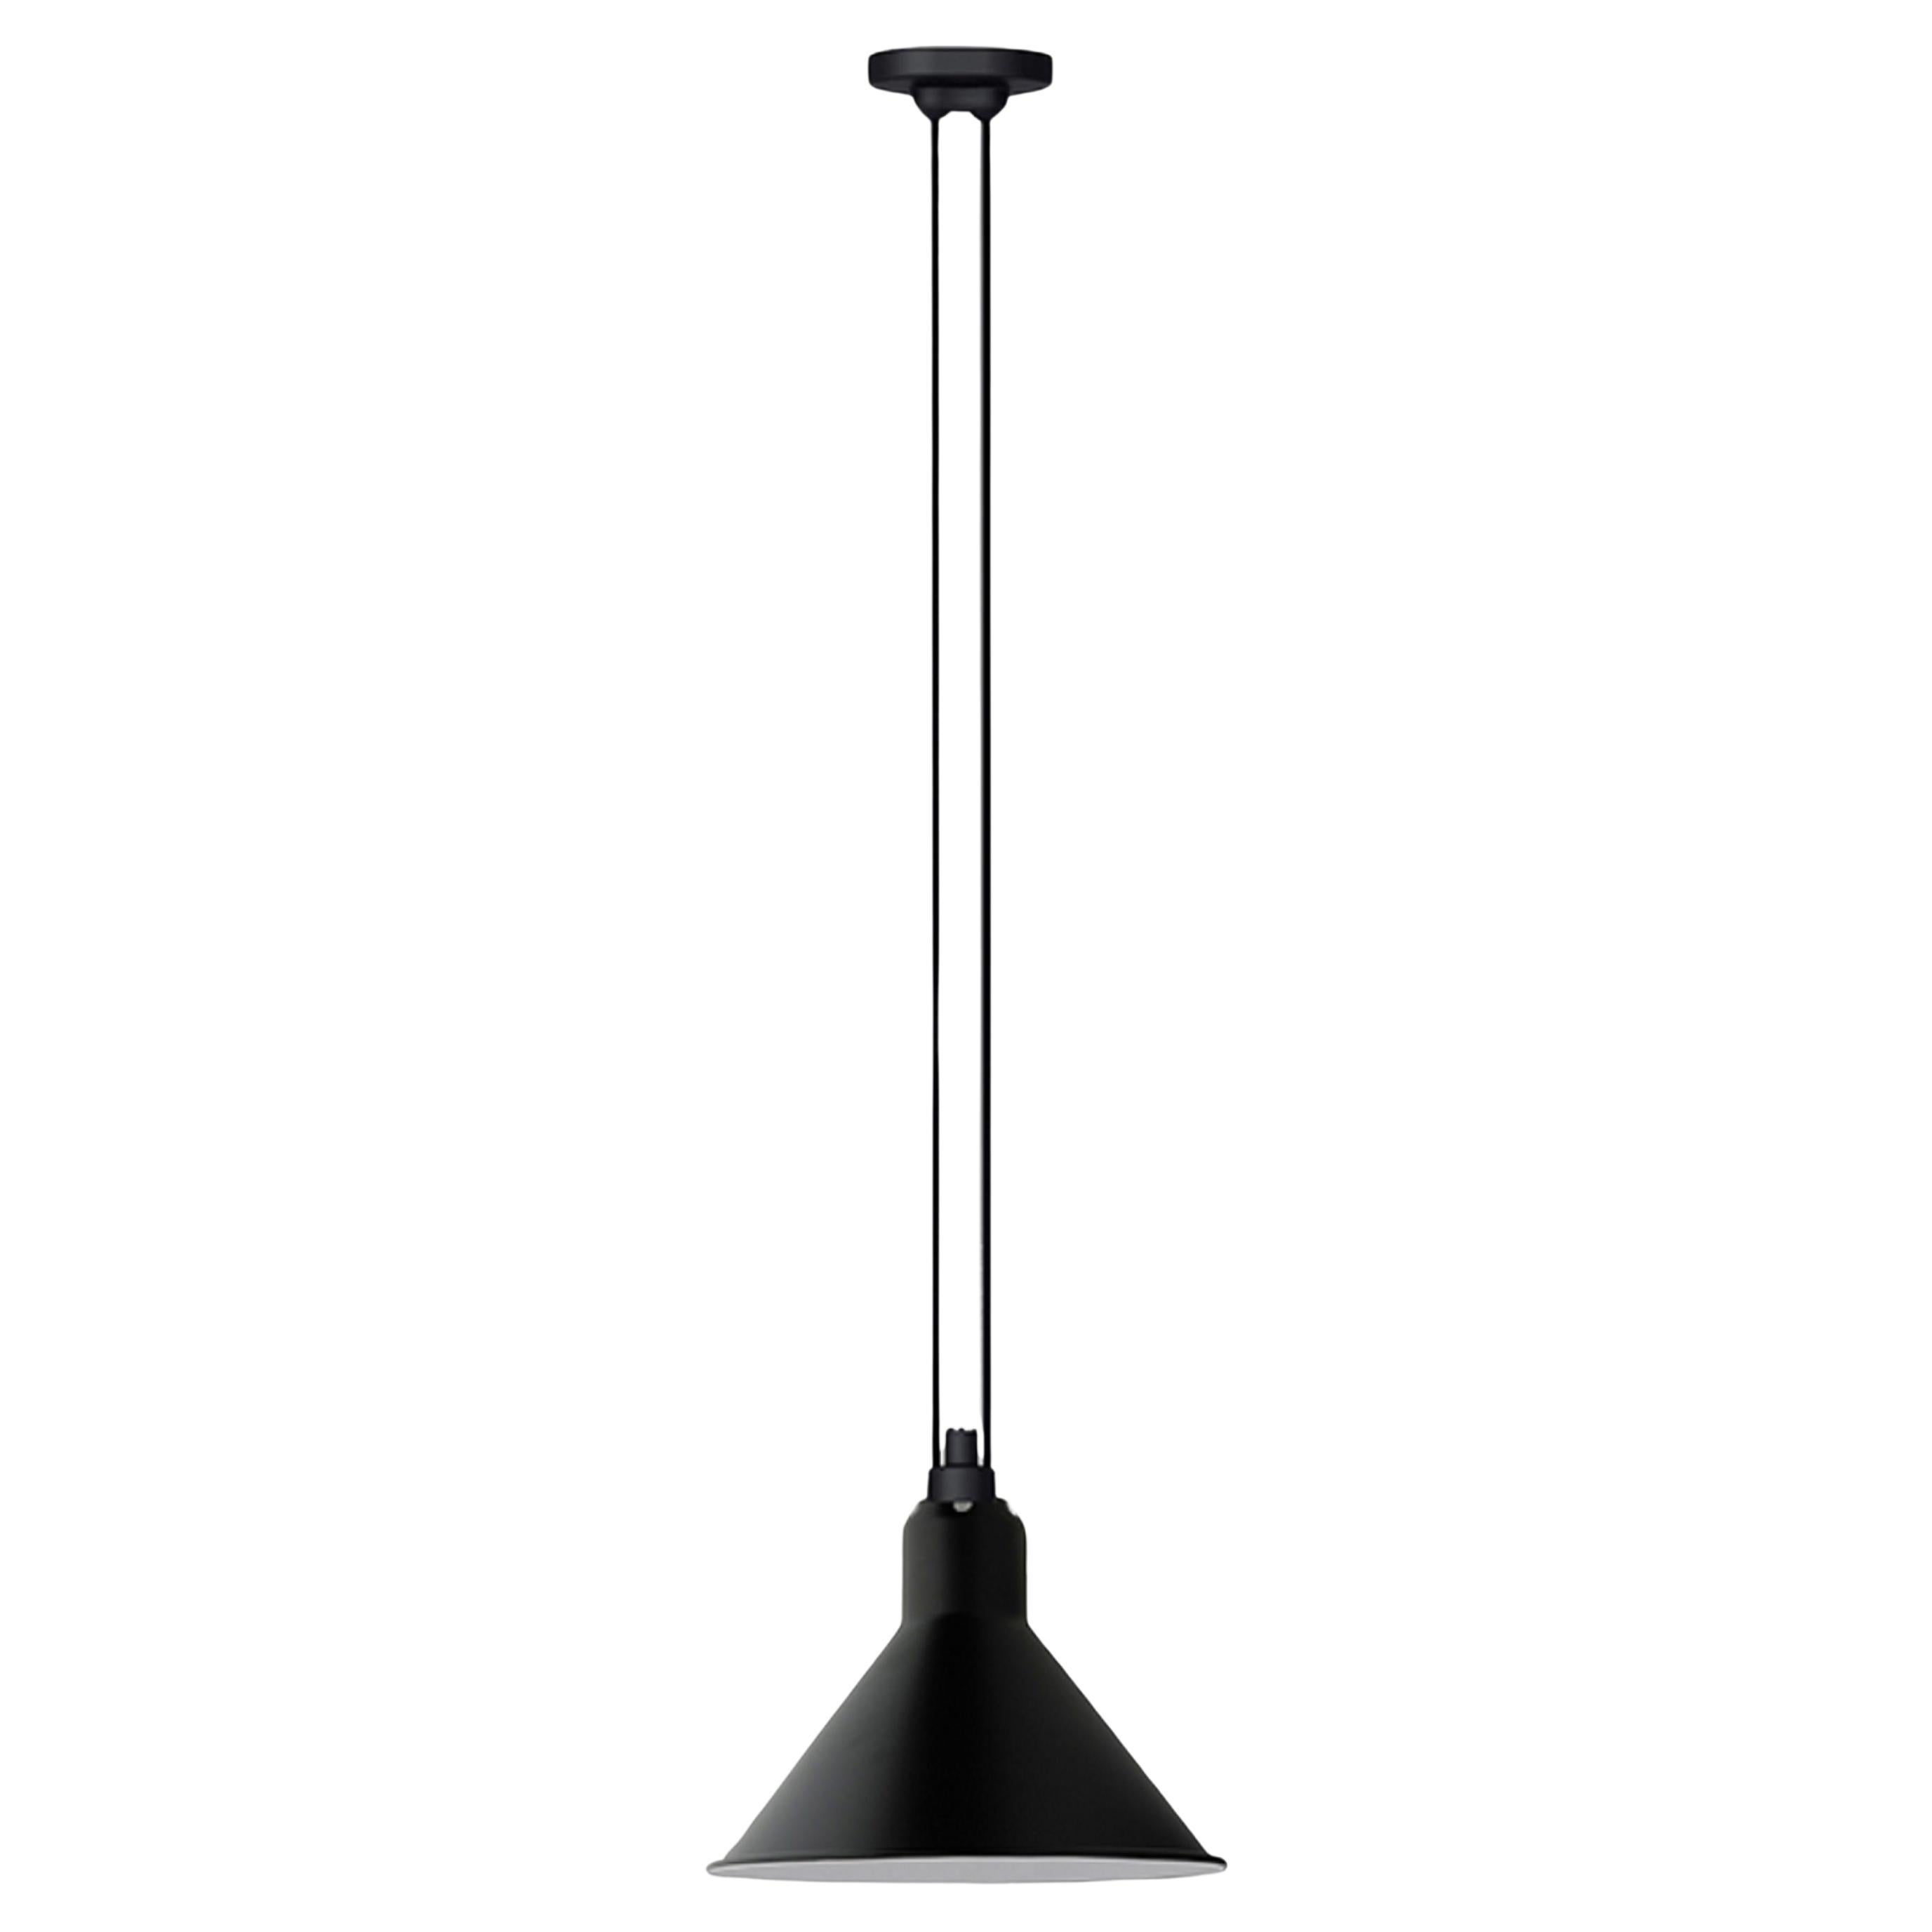 DCW Editions Les Acrobates N°322 Large Conic Pendant Lamp in Black Shade